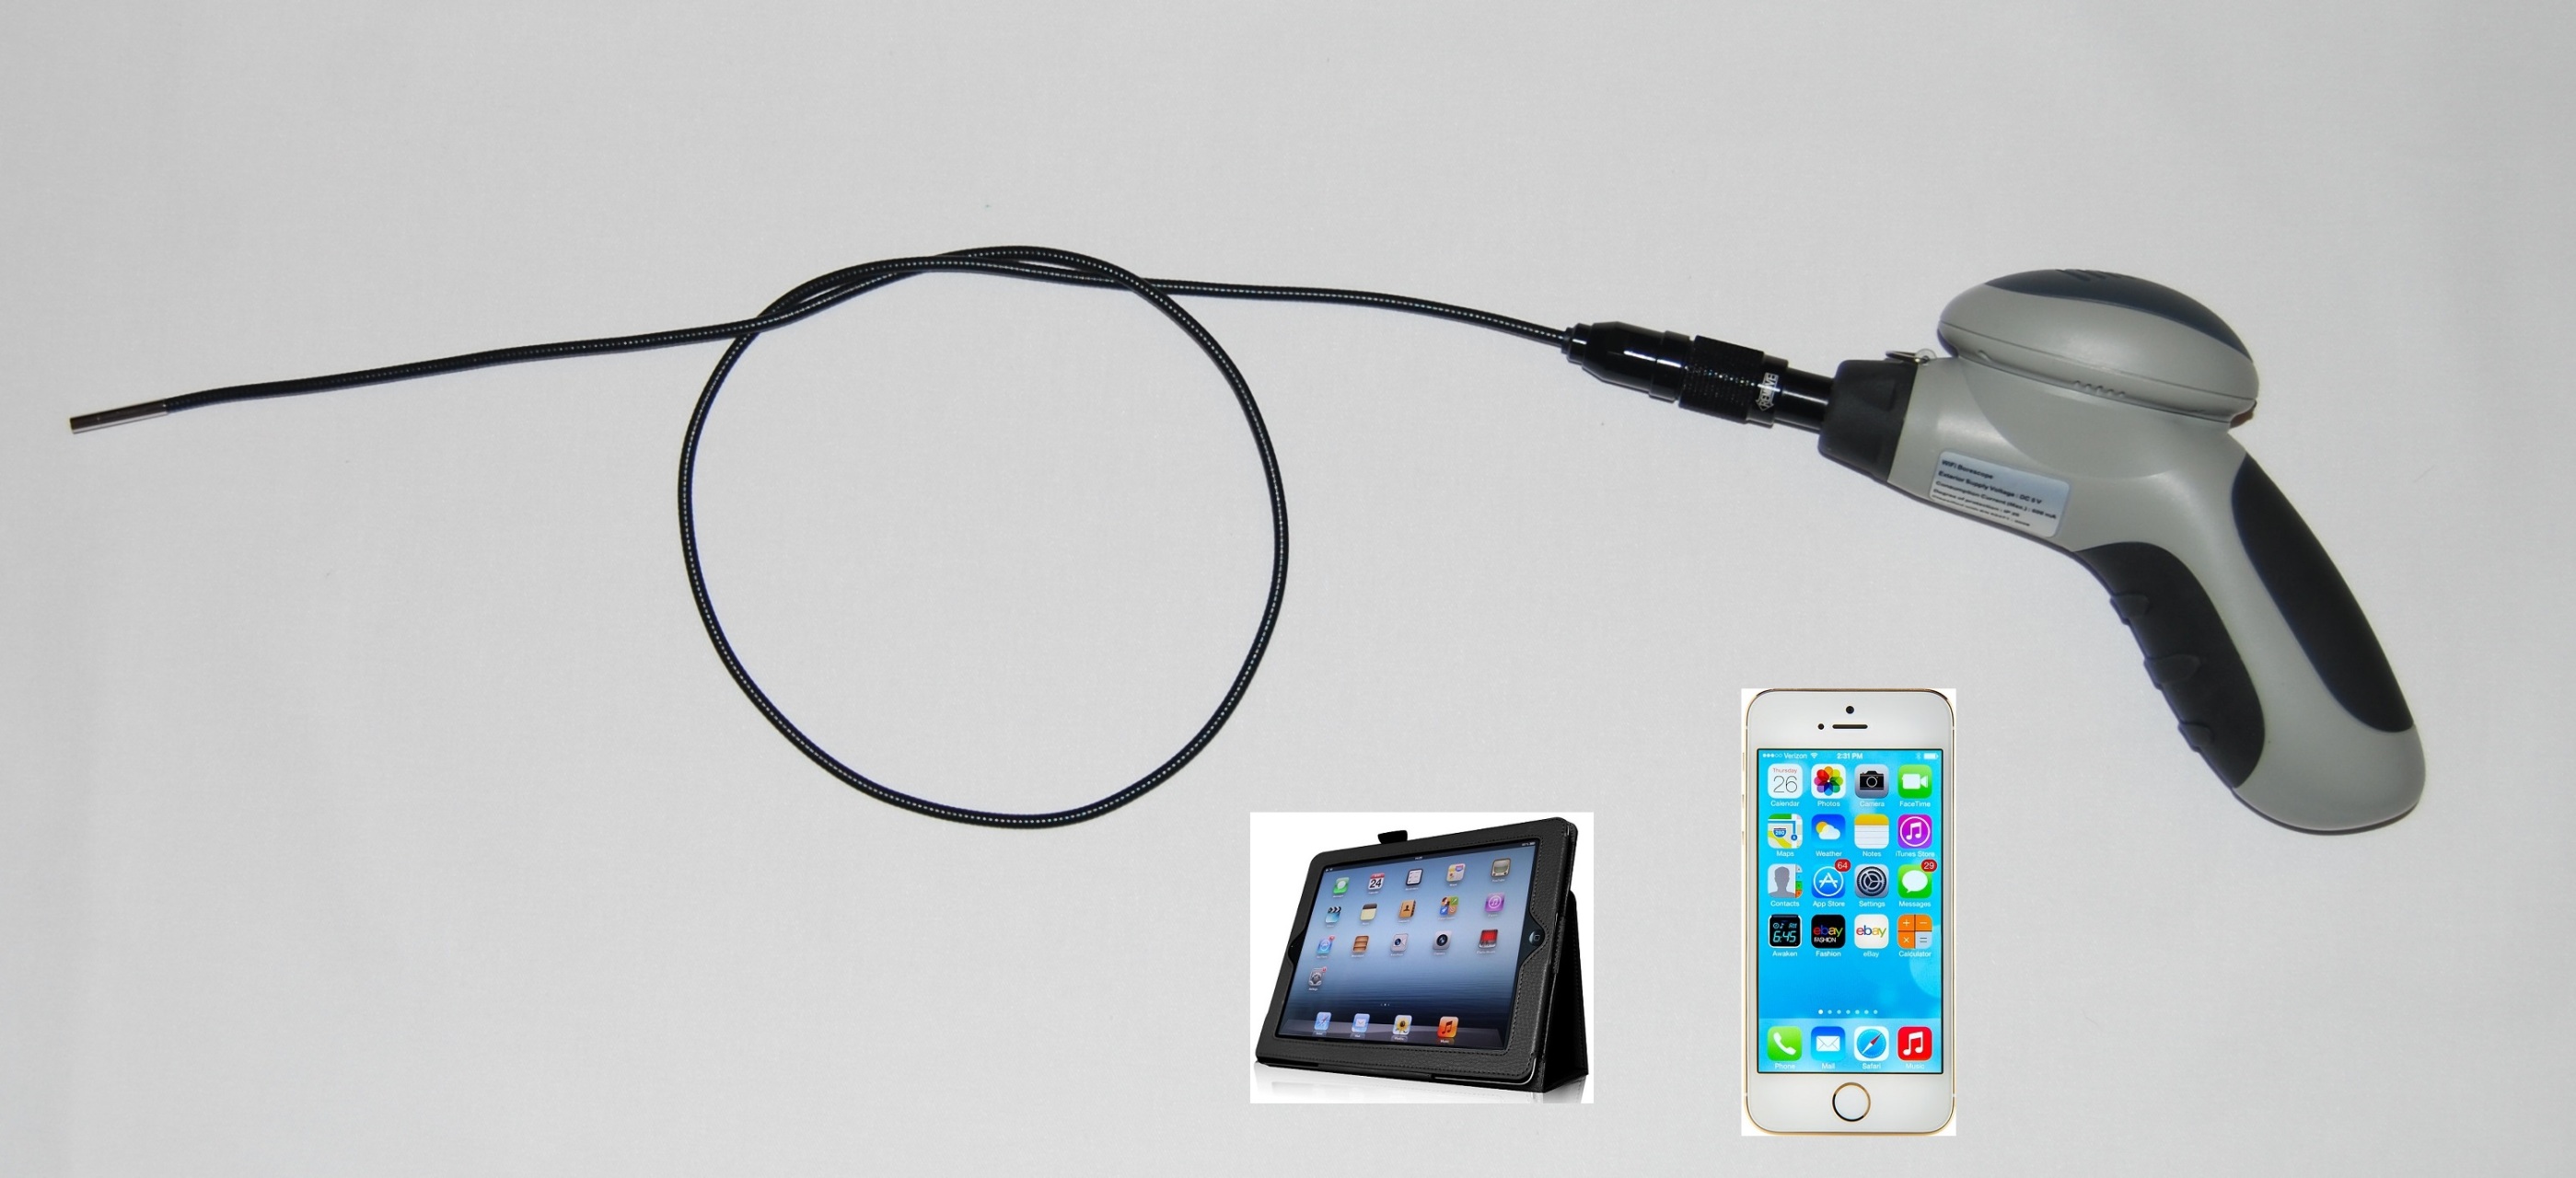 4.5mm Flexible Inspection Camera for iPhone/Android - Oasis Scientific Inc.